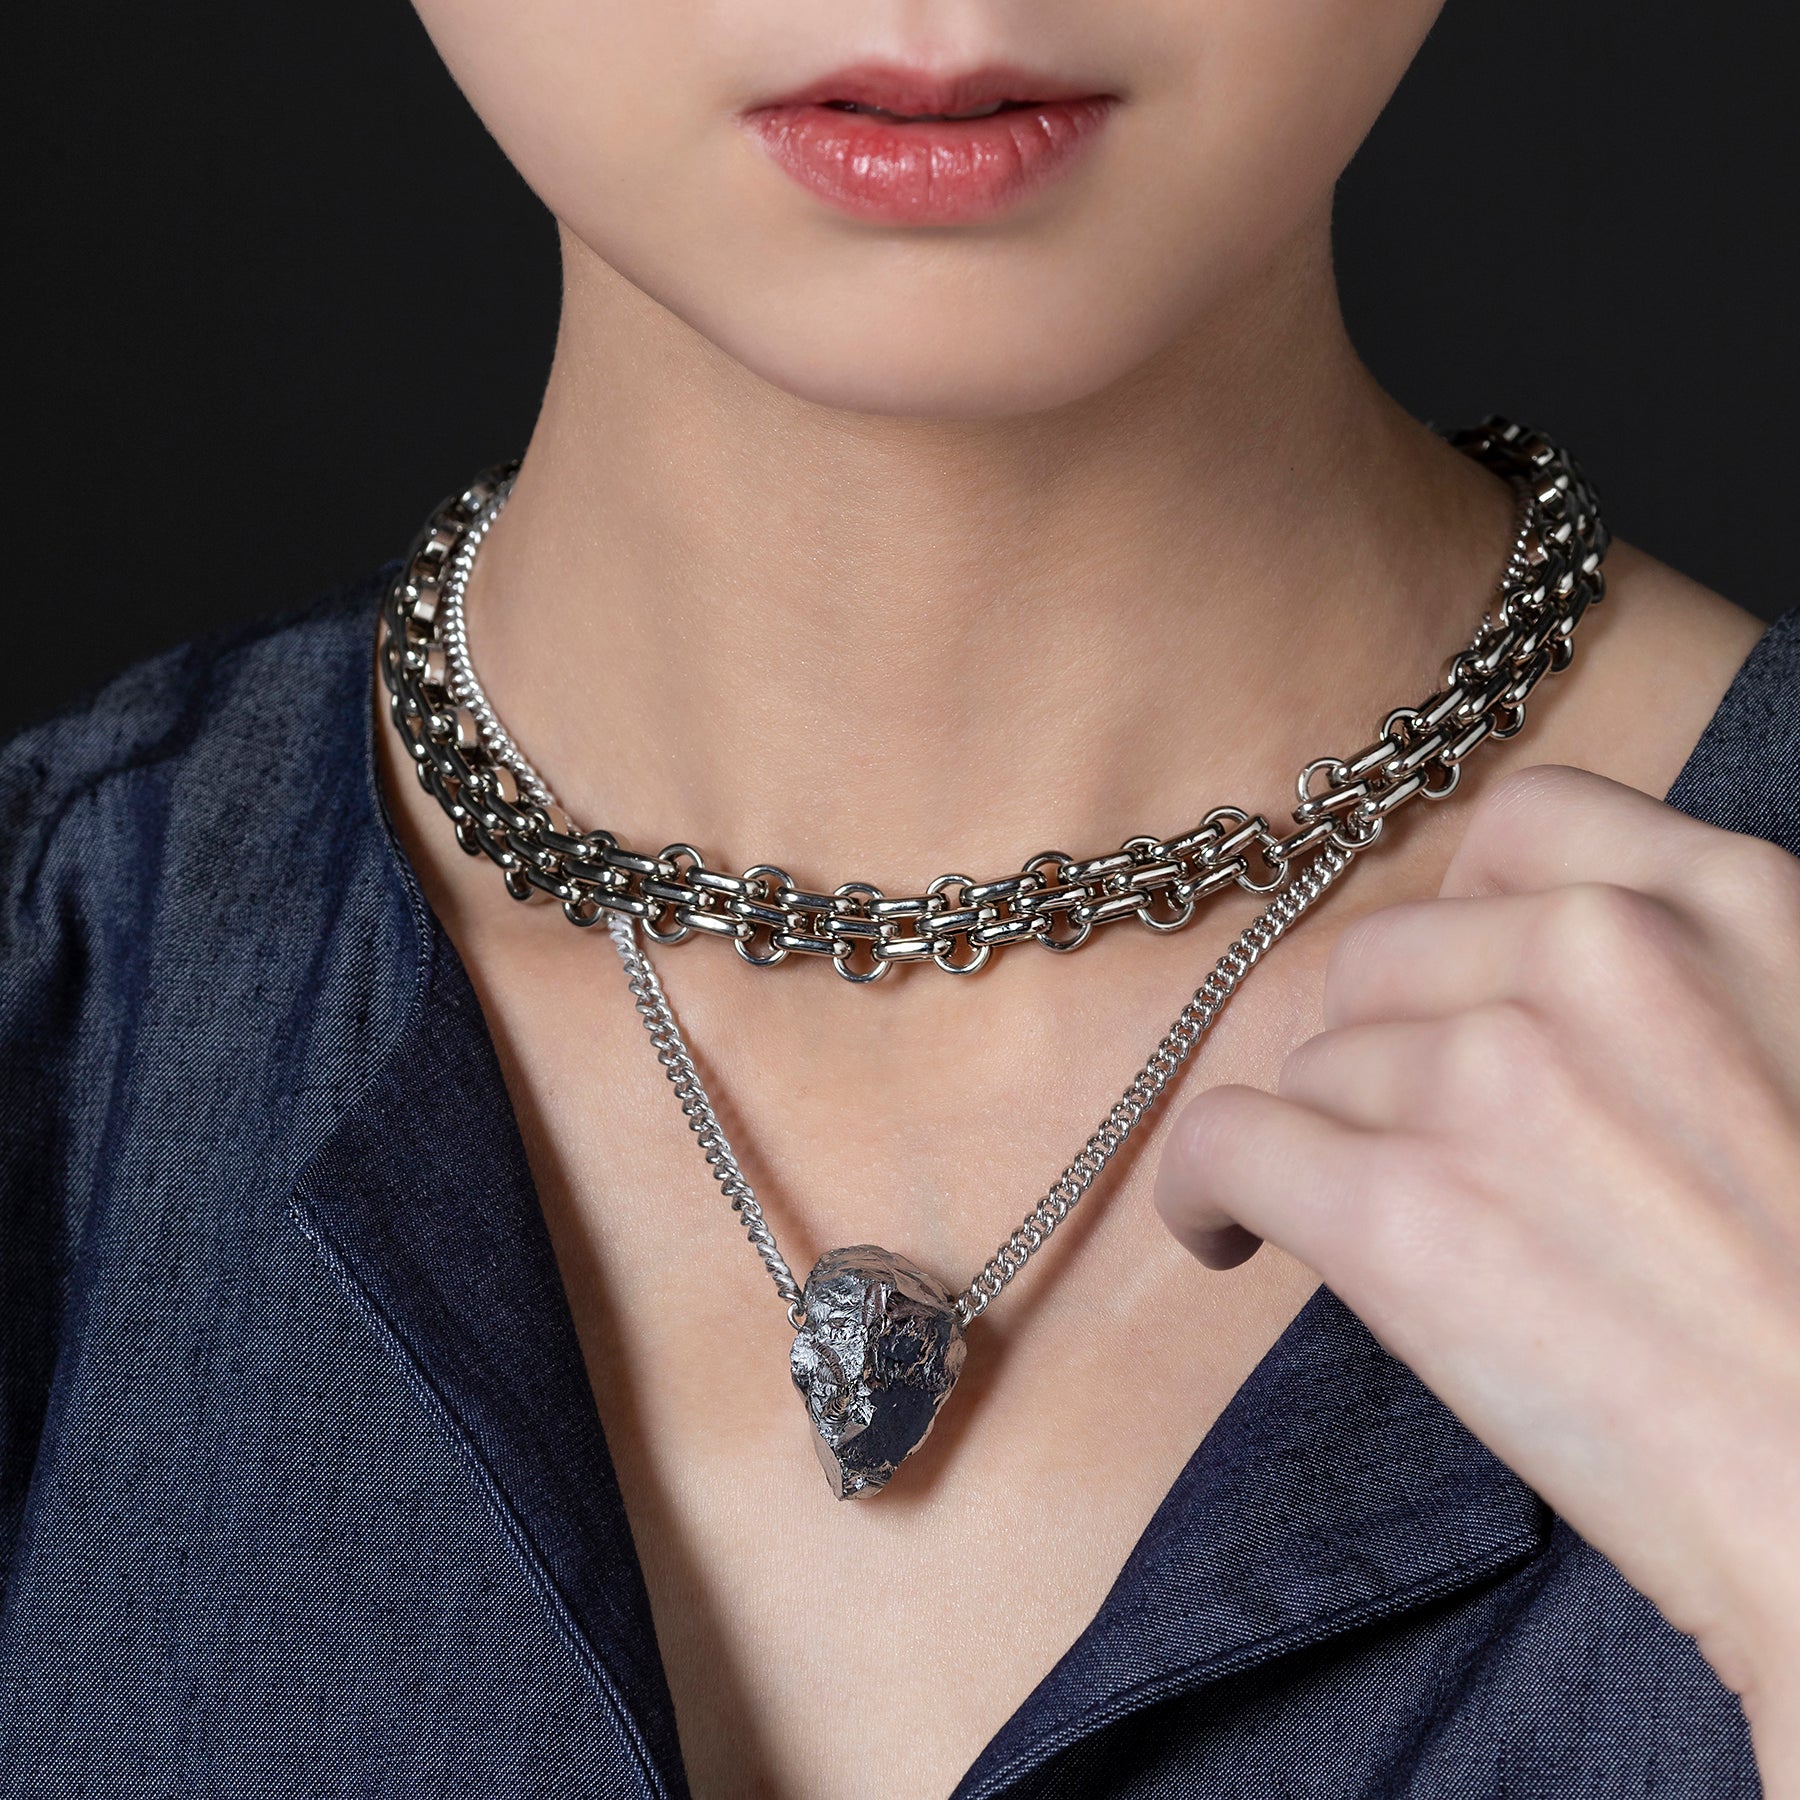 Panther Chain Necklace (unisex) - Chainless Brain